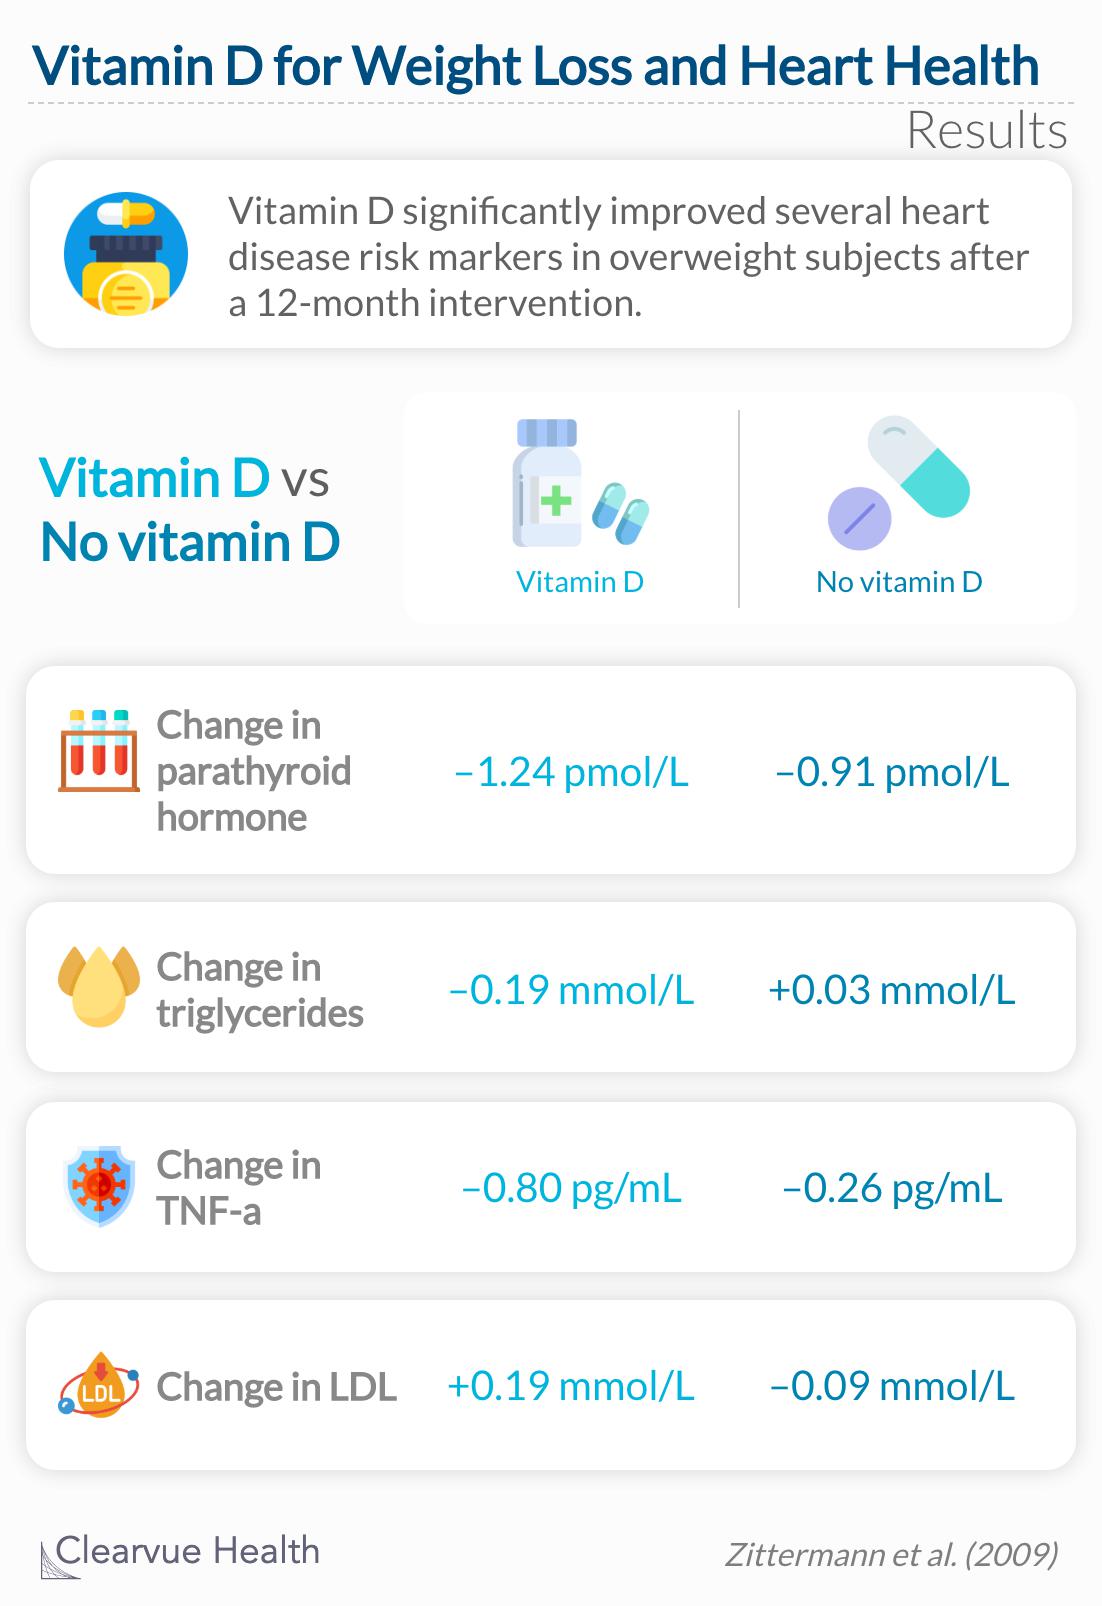 Vitamin D significantly improved several heart disease risk markers in overweight subjects after a 12-month intervention. 